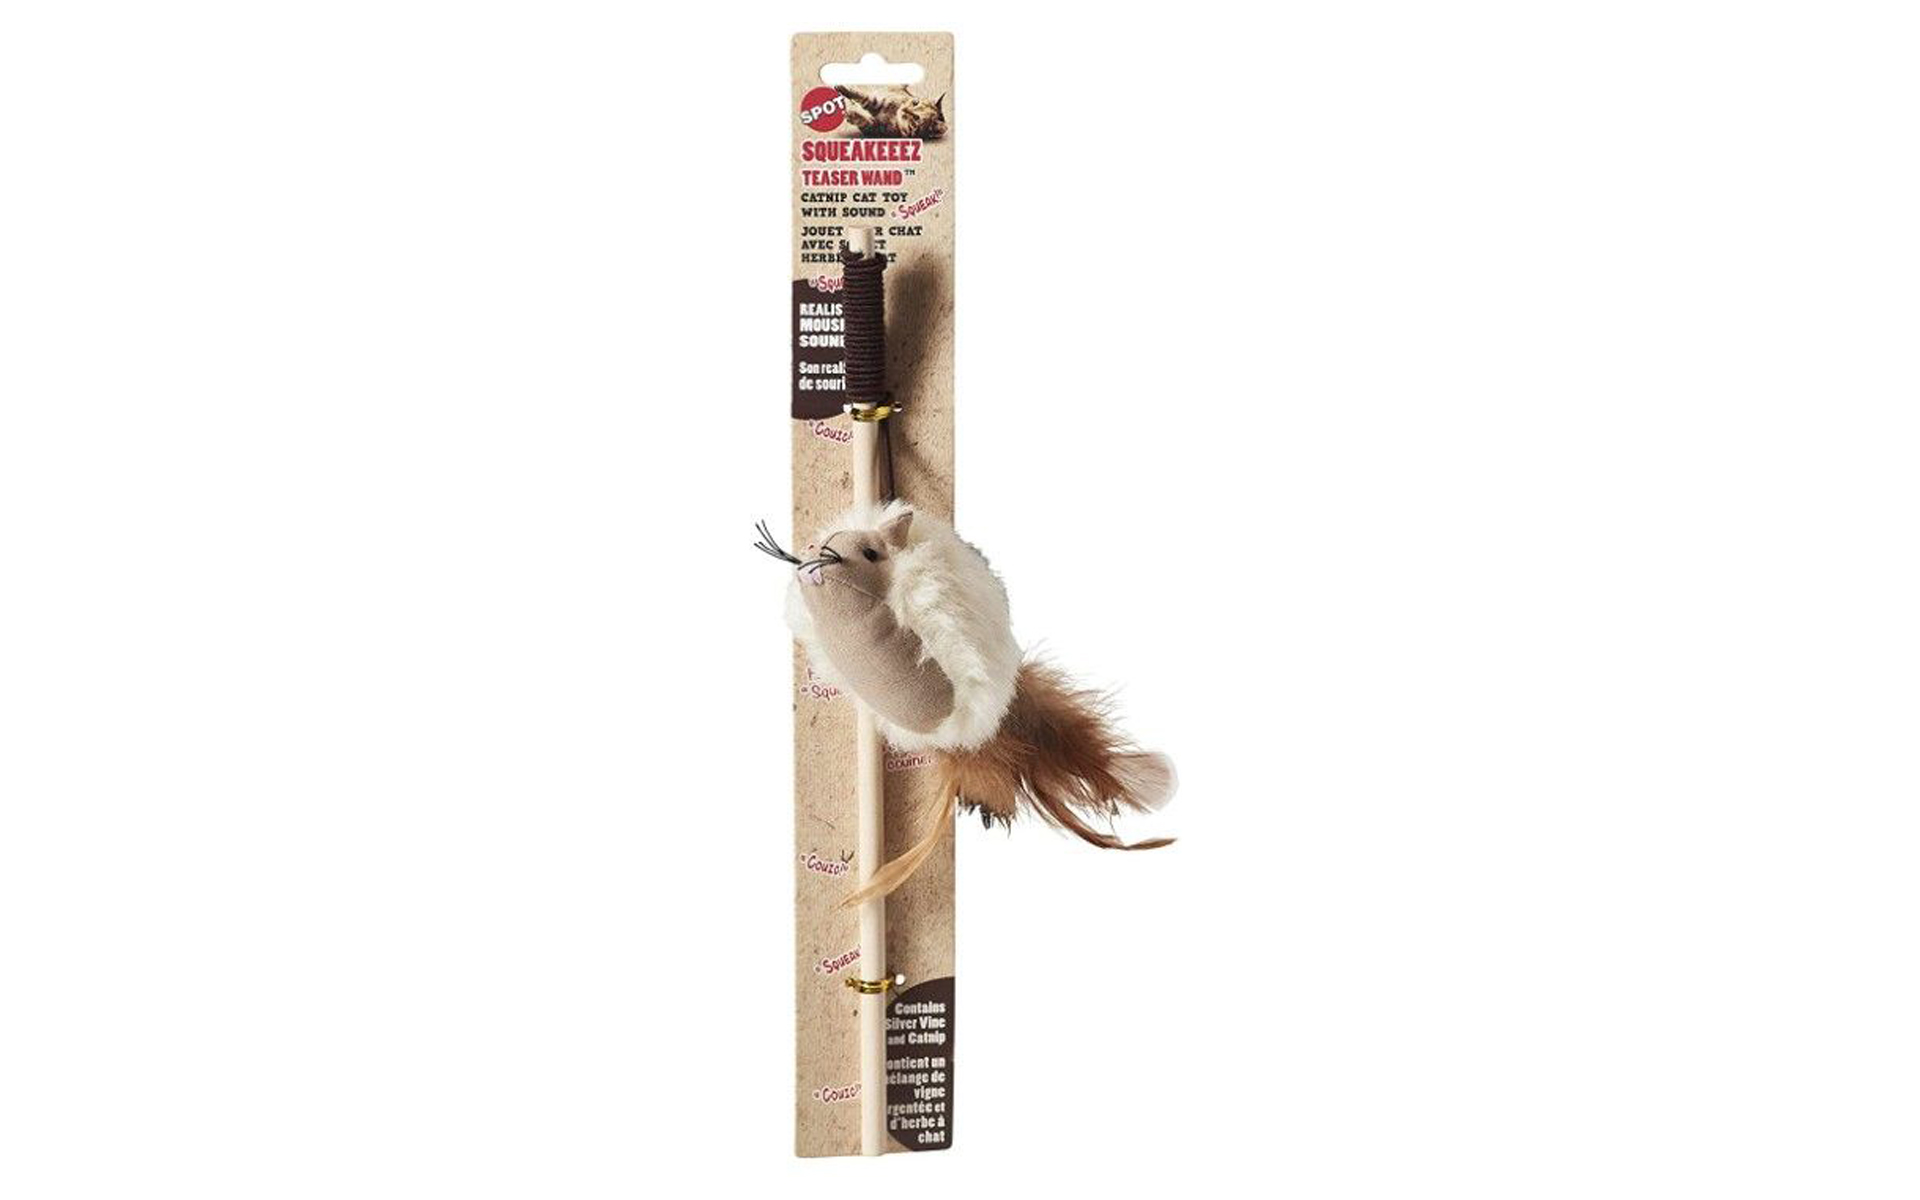 Spot Squeakeeez Mouse Teaser Wand Cat Toy Assorted Colors